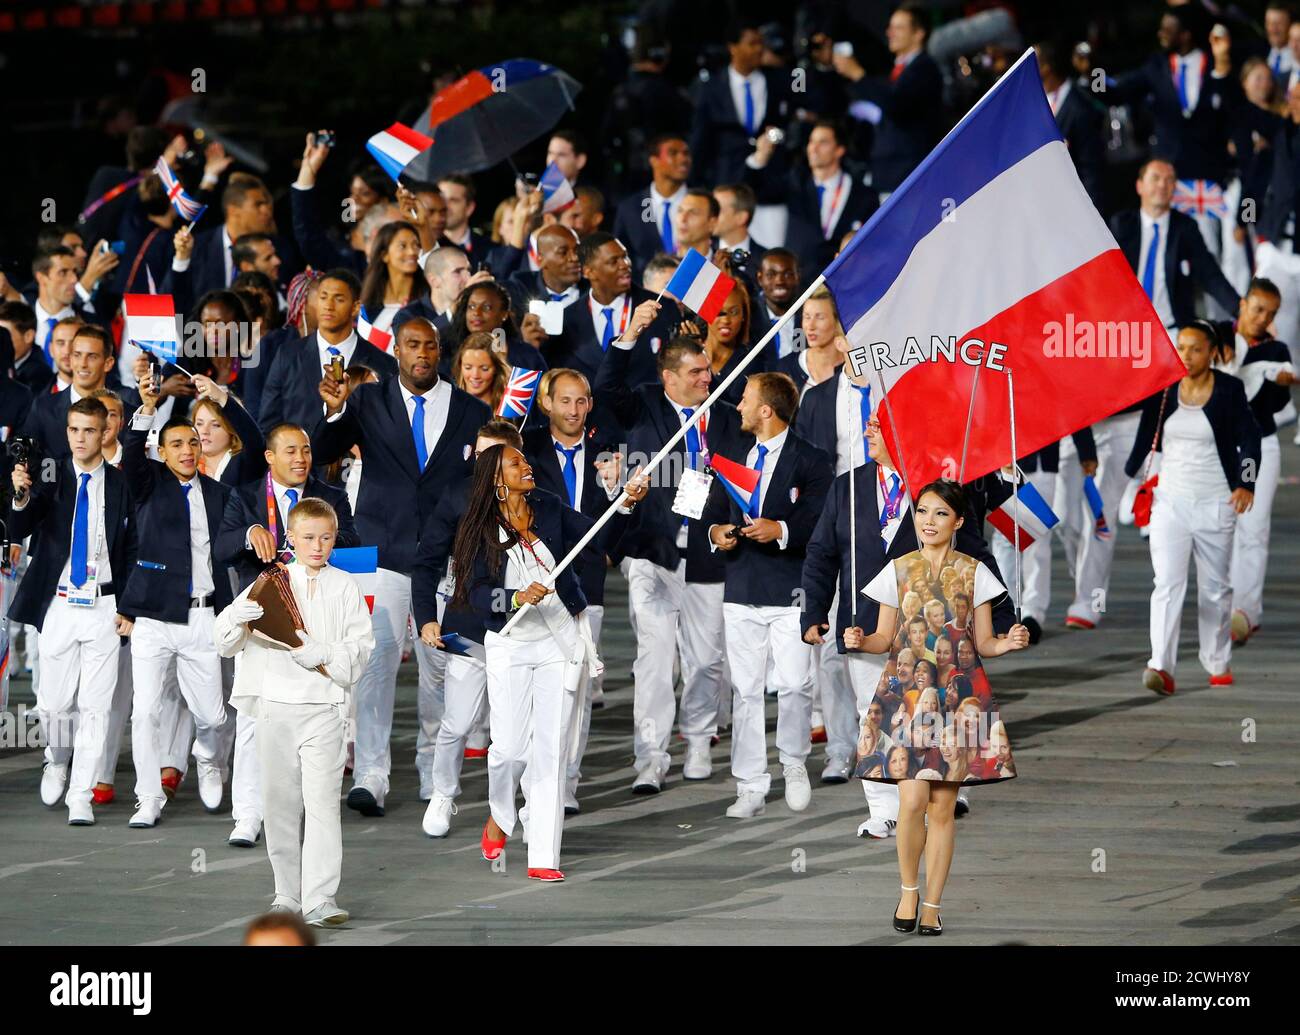 France's flag bearer Laura Flessel-Colovic holds the national flag as she  leads the contingent in the athletes parade during the opening ceremony of  the London 2012 Olympic Games at the Olympic Stadium